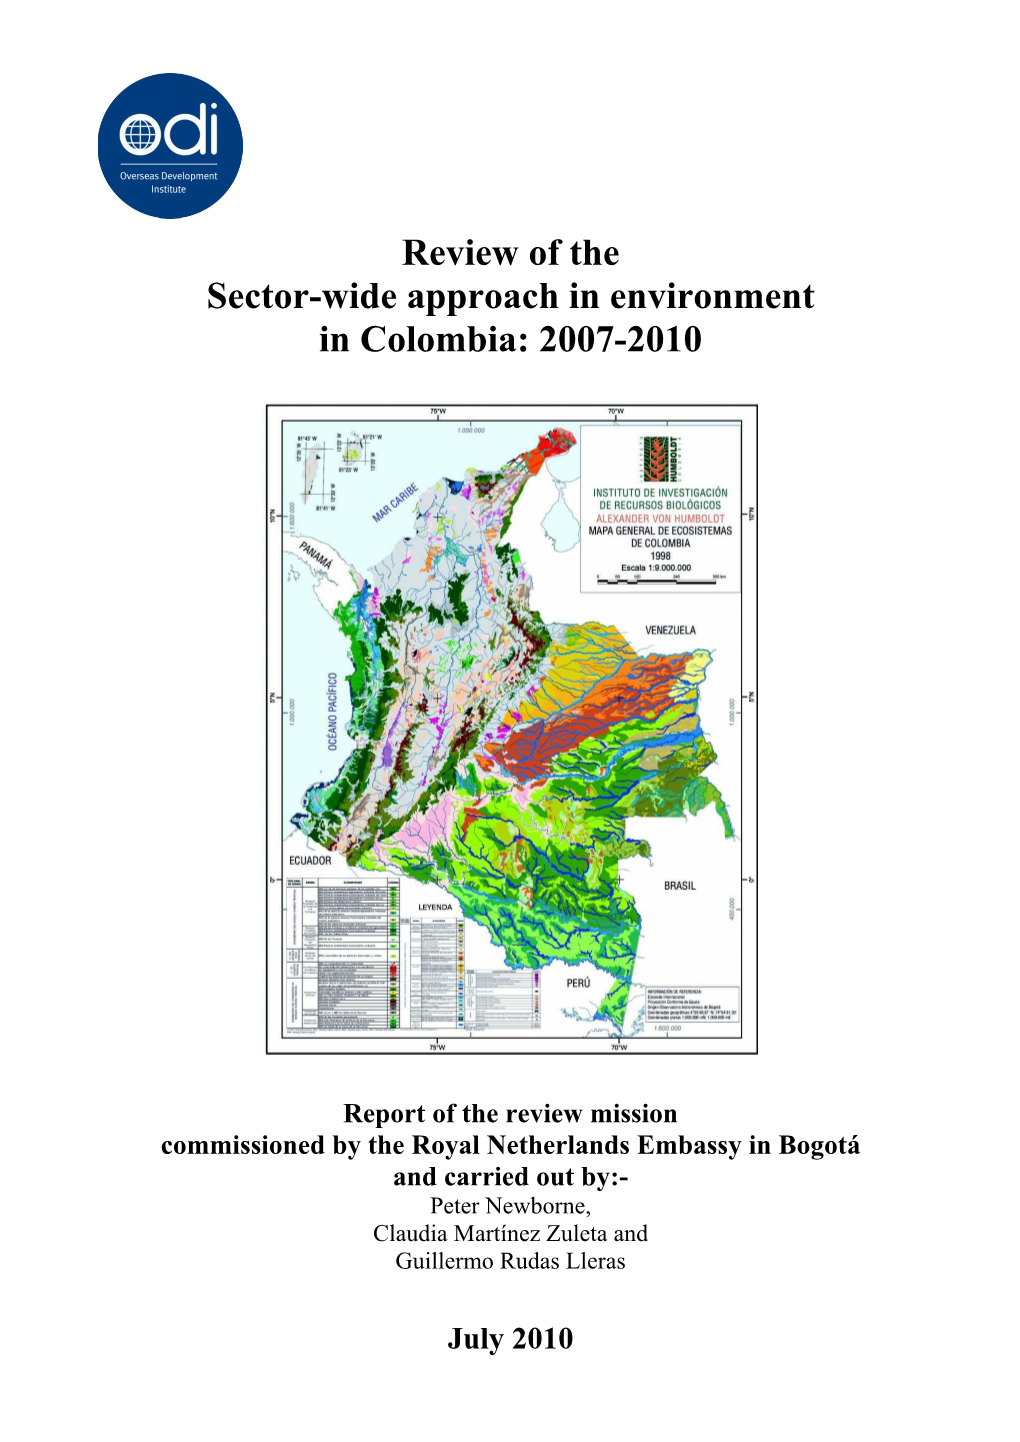 Review of the Sector-Wide Approach in Environment in Colombia: 2007-2010